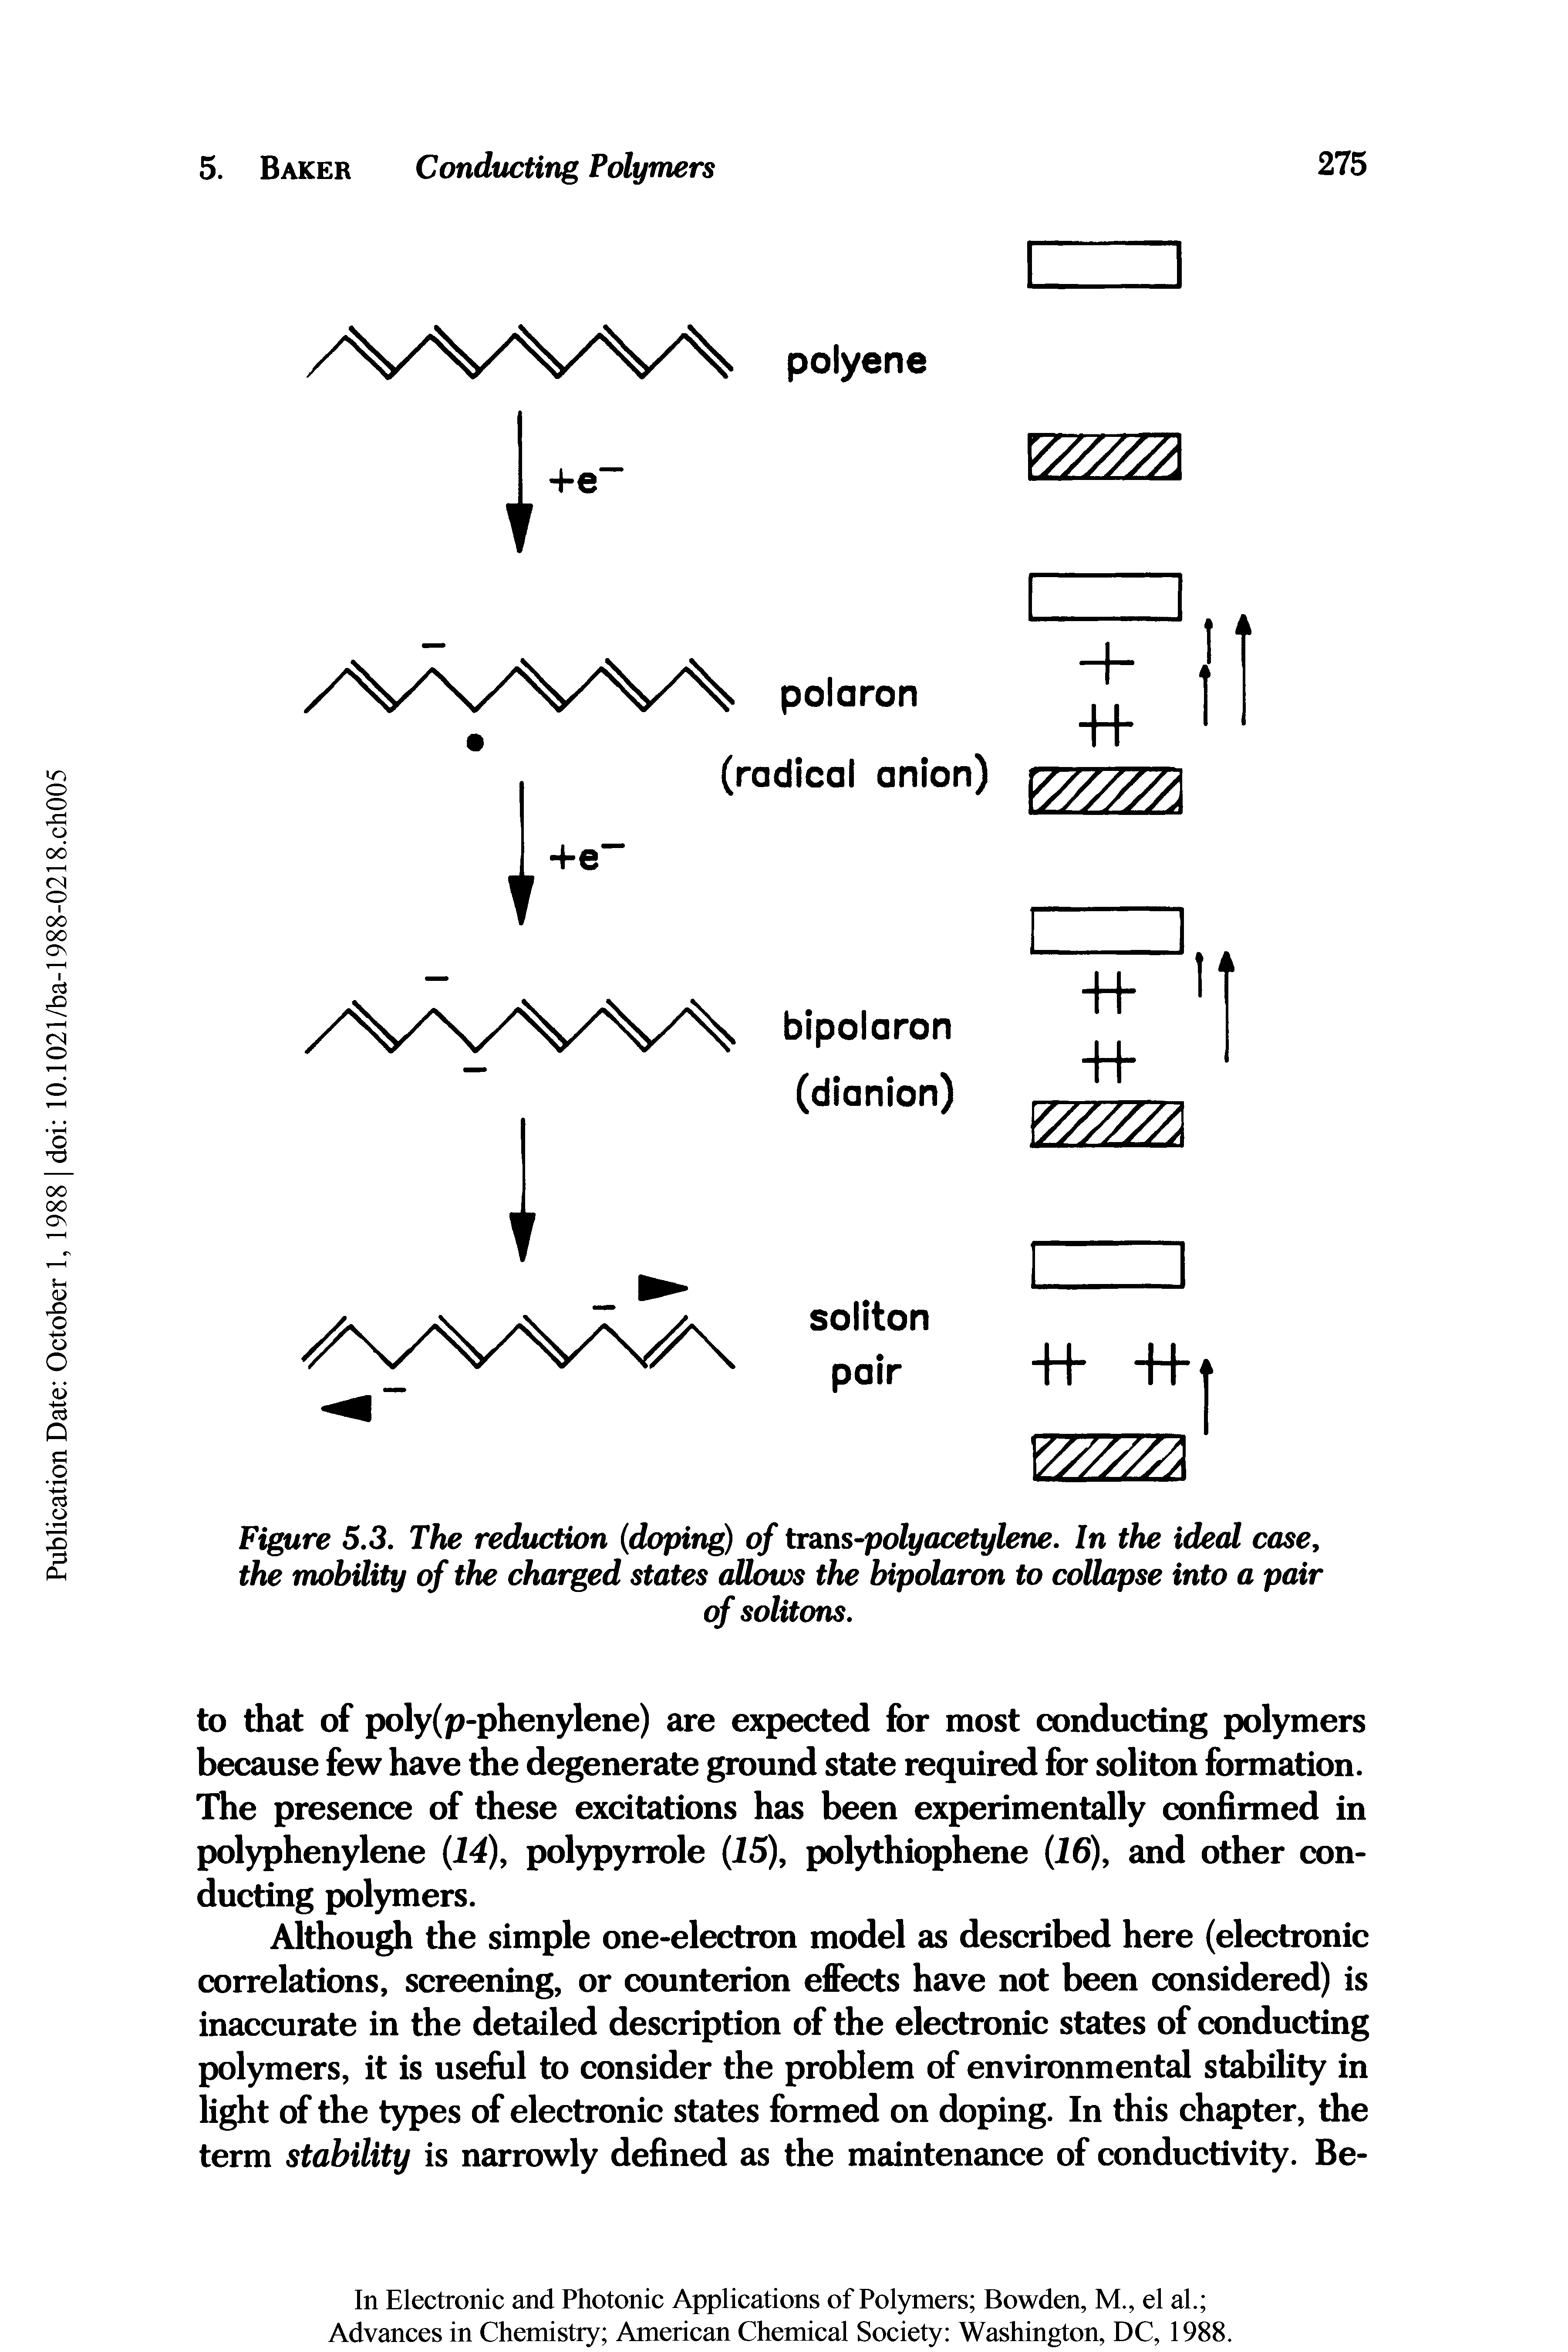 Figure 5.3. The reduction (doping) of trans-polyacetylene. In the ideal case, the mobility of the charged states allows the bipolaron to collapse into a pair...